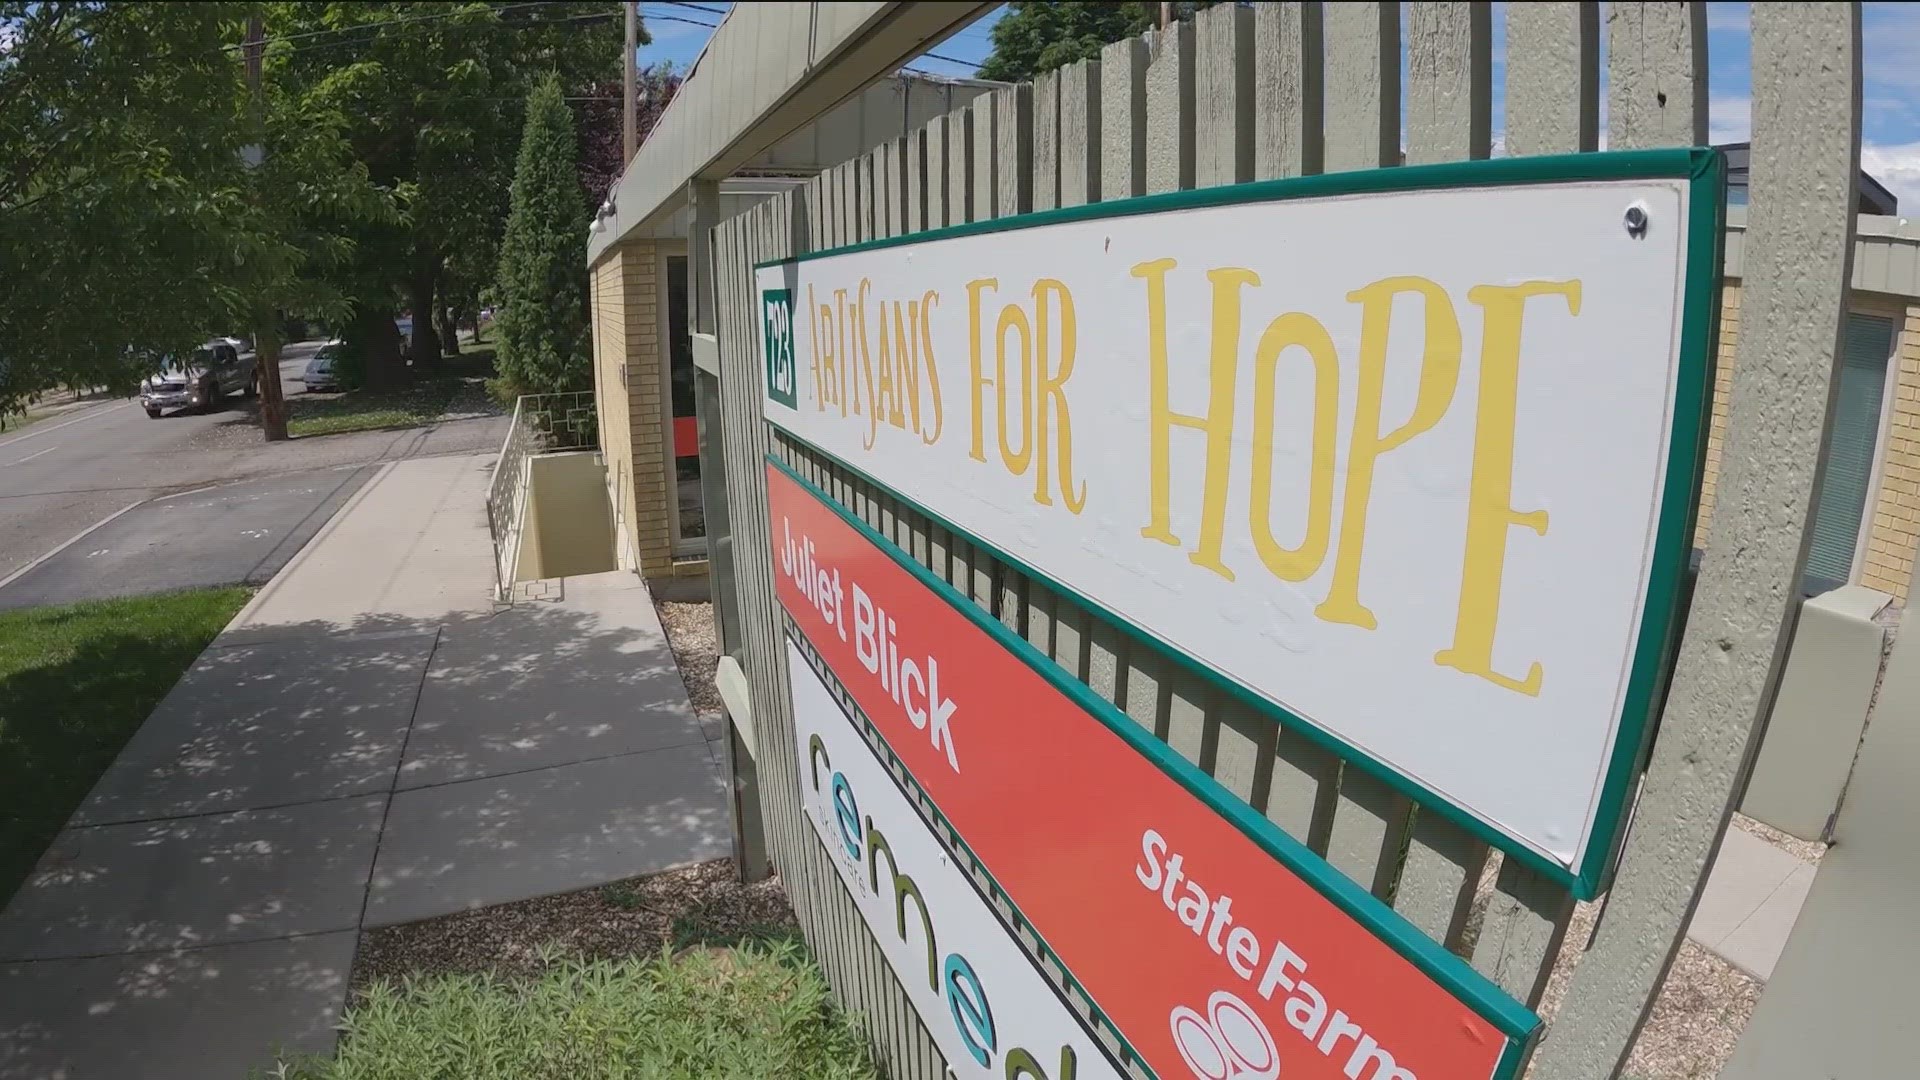 The nonprofit opened nearly a decade ago. Recent storms have left Artisans for Hope flooded.